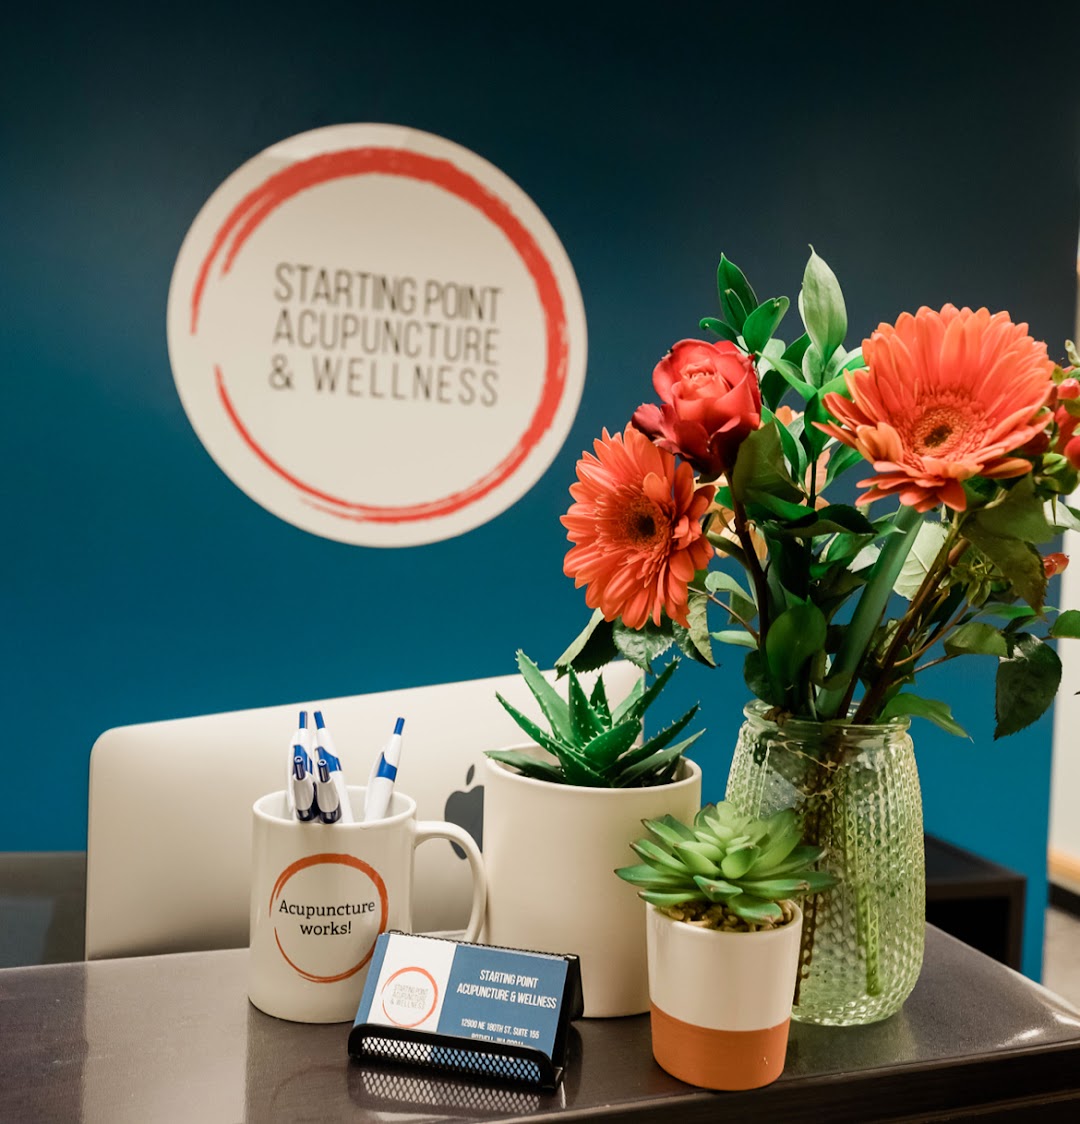 Starting Point Acupuncture & Wellness Bothell Acupuncture - Pain Management - Naturopathic Doctor